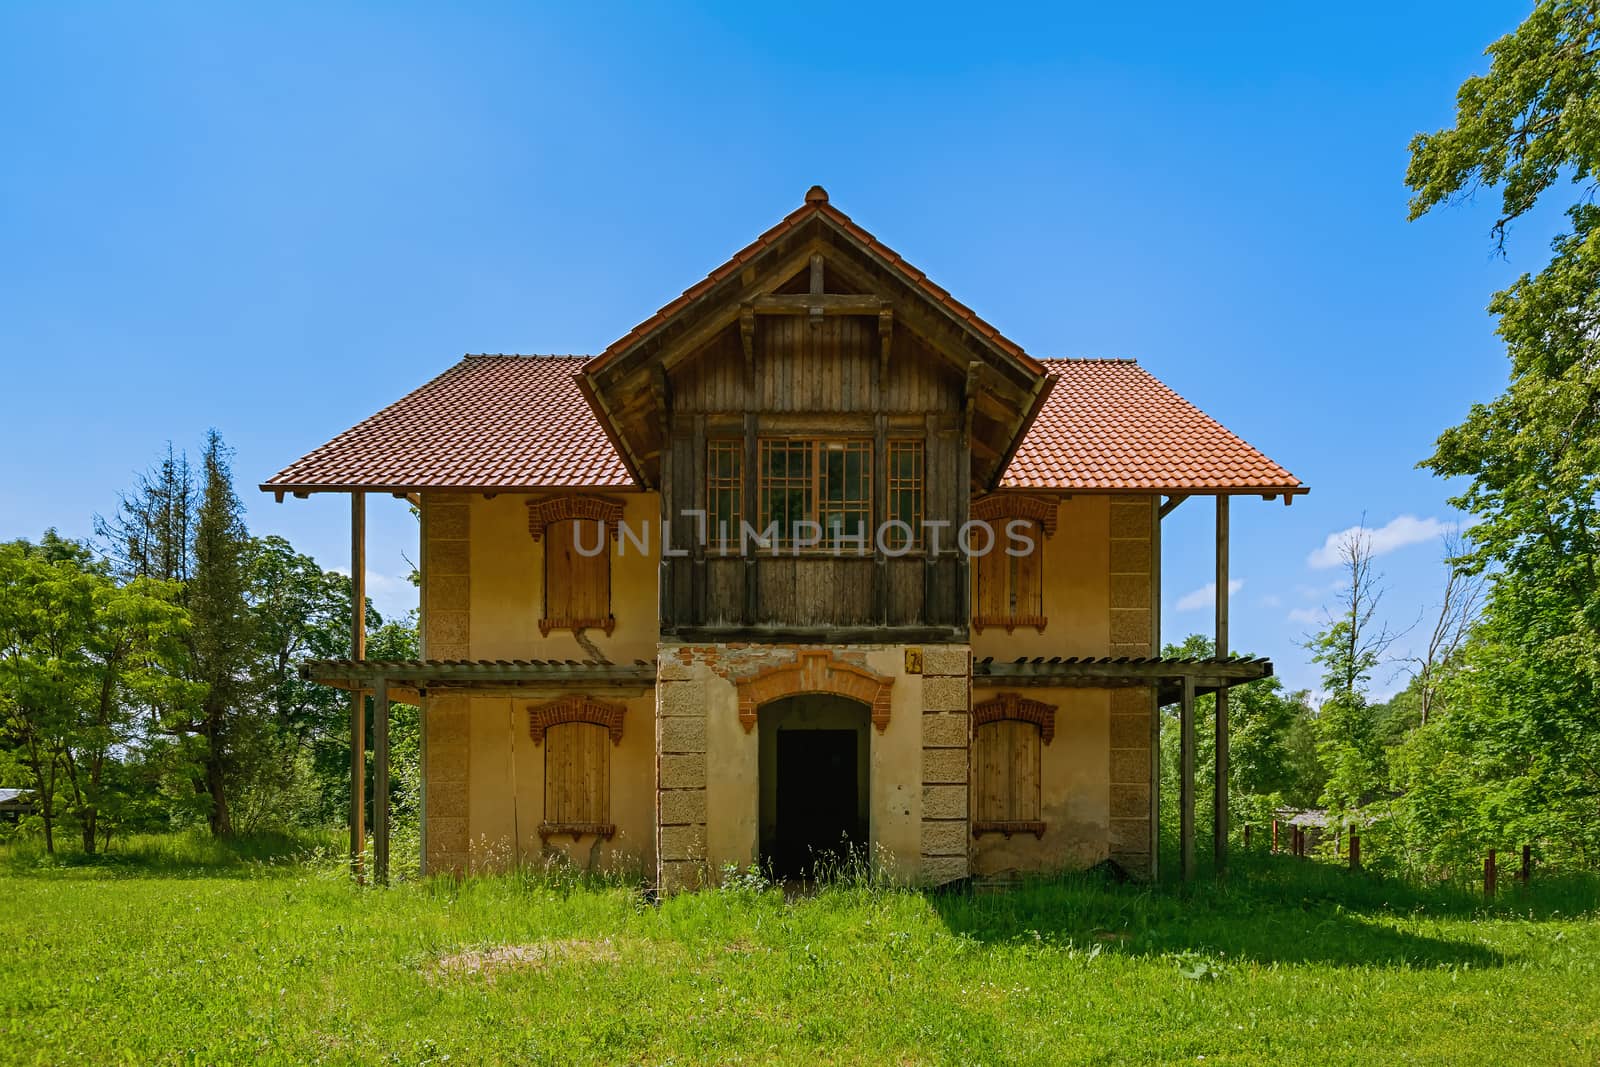 Abandoned rural house by SNR